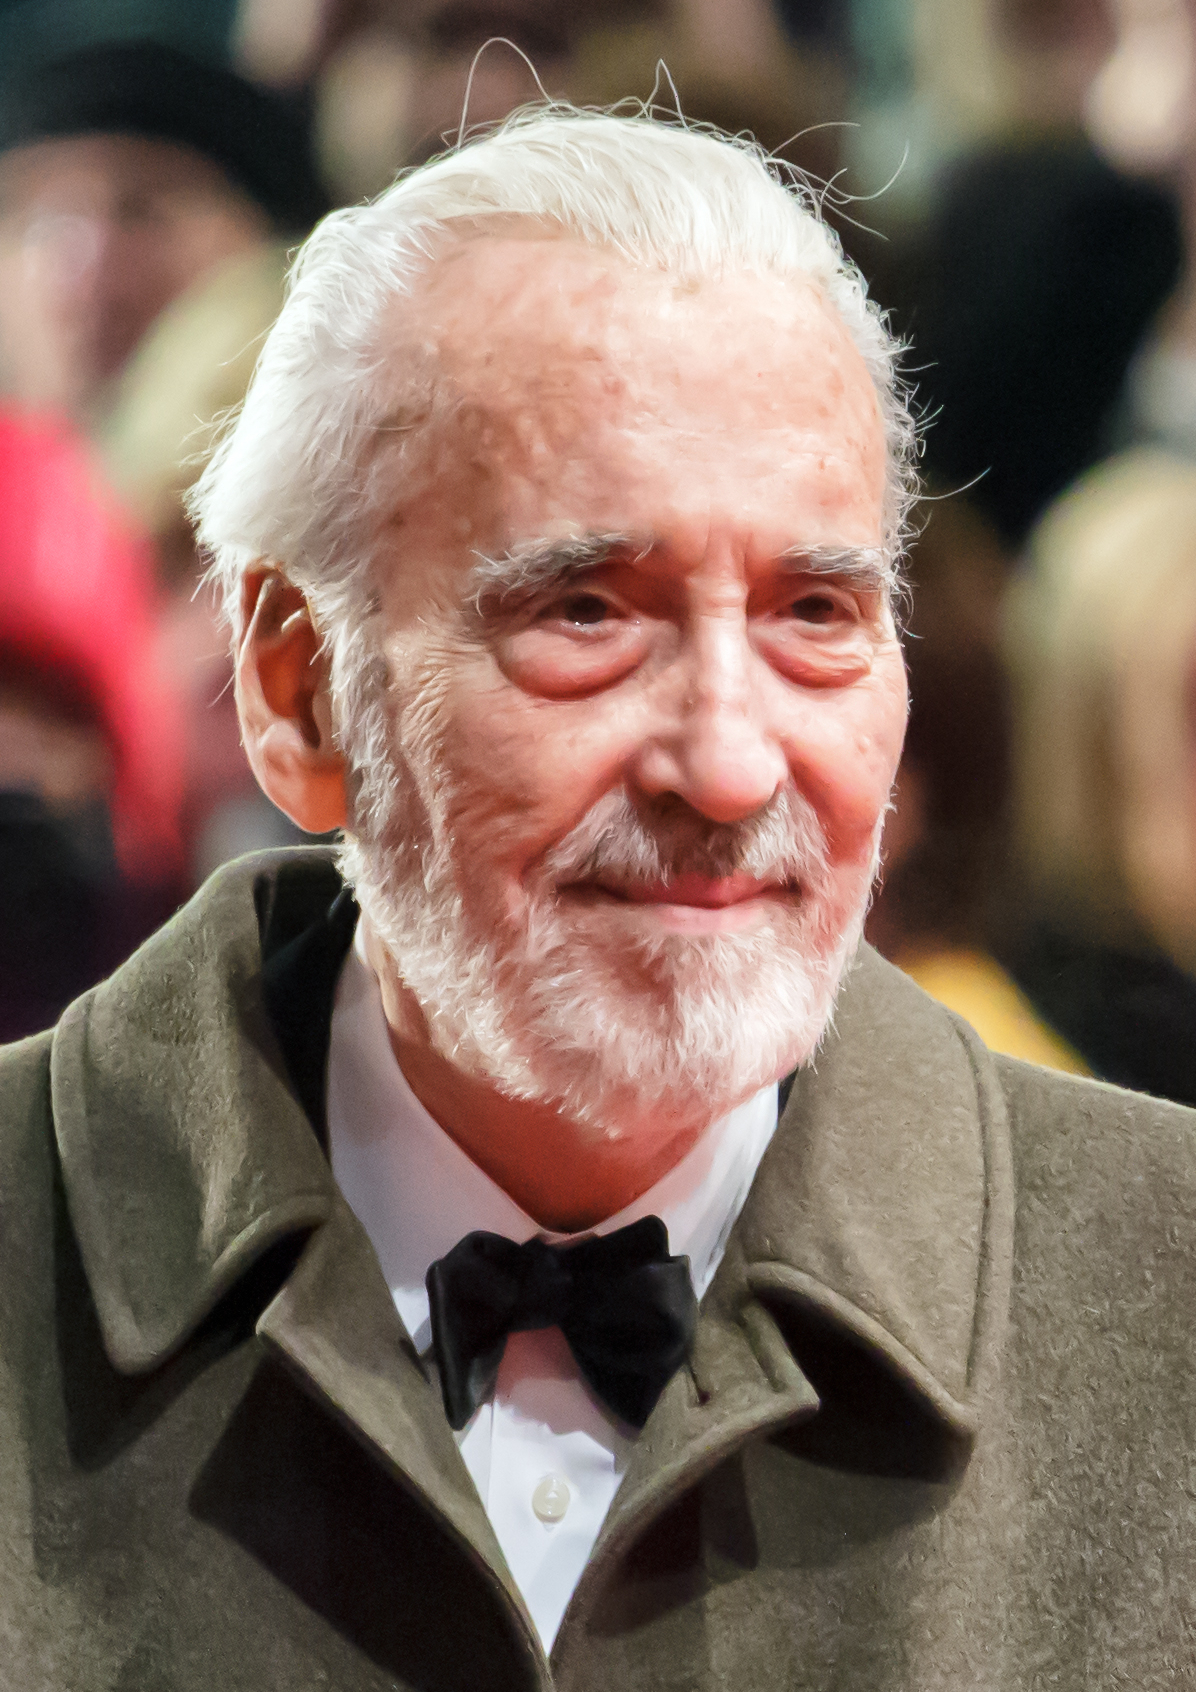 Who is the actor behind Count Dooku?